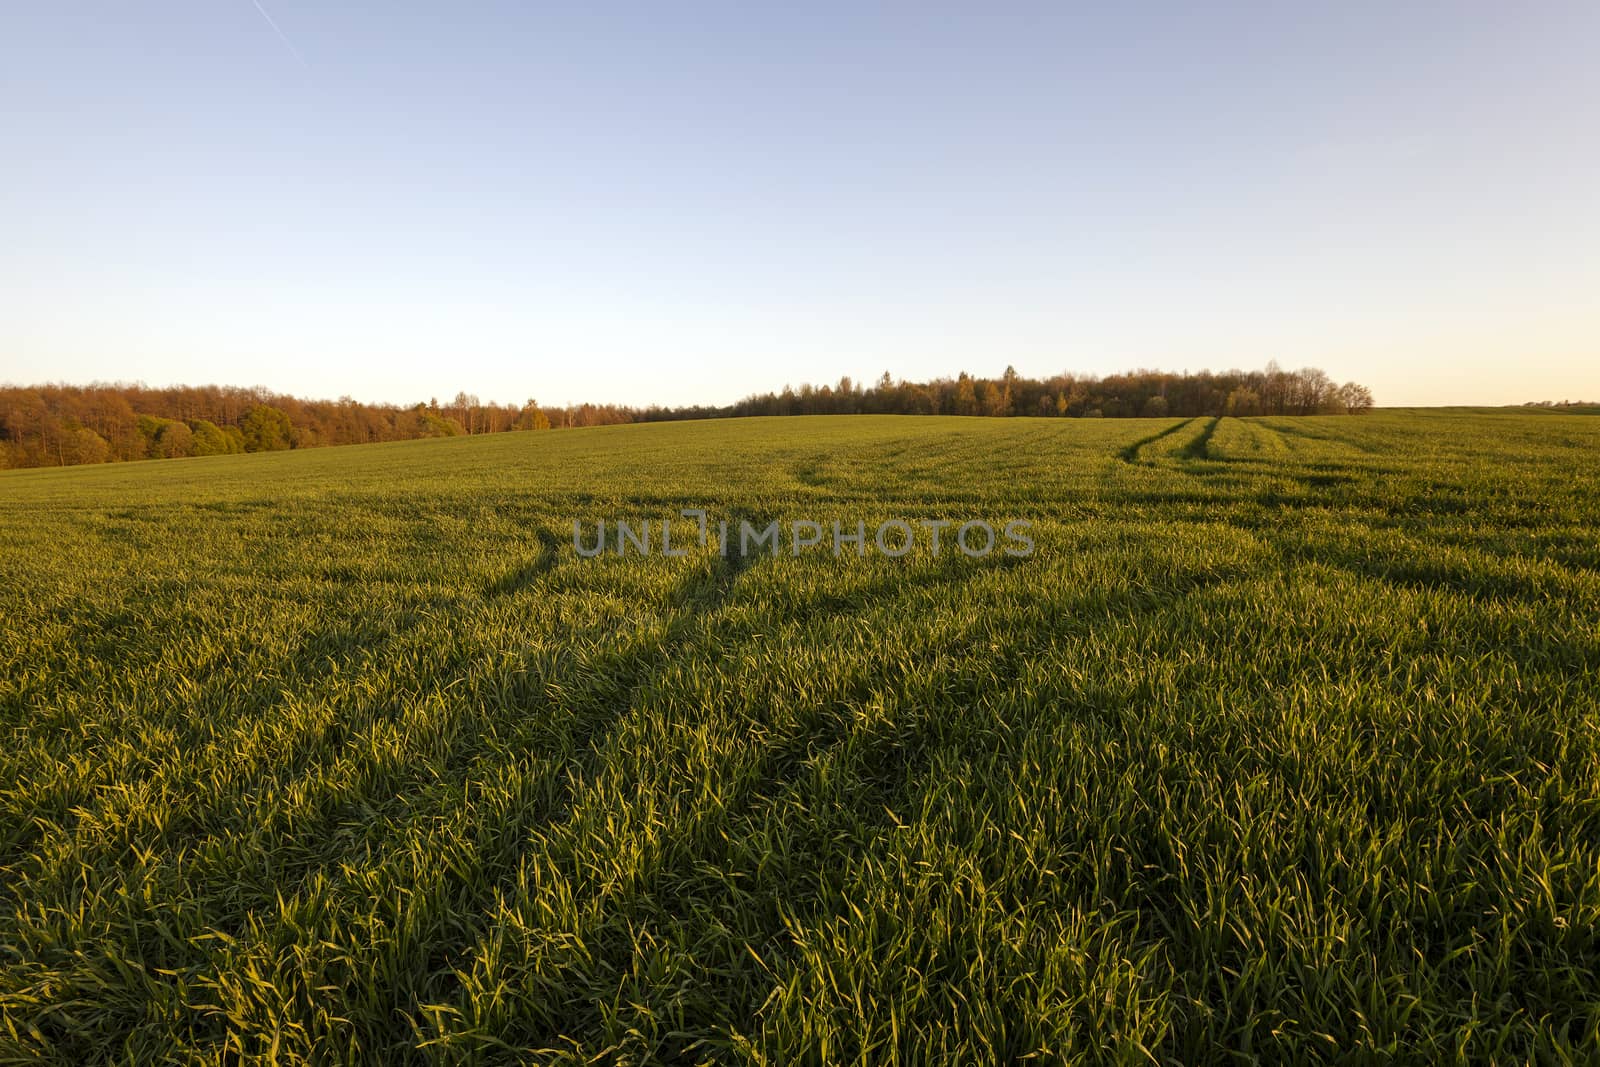  an agricultural field on which young cereals grow. time - a sunset